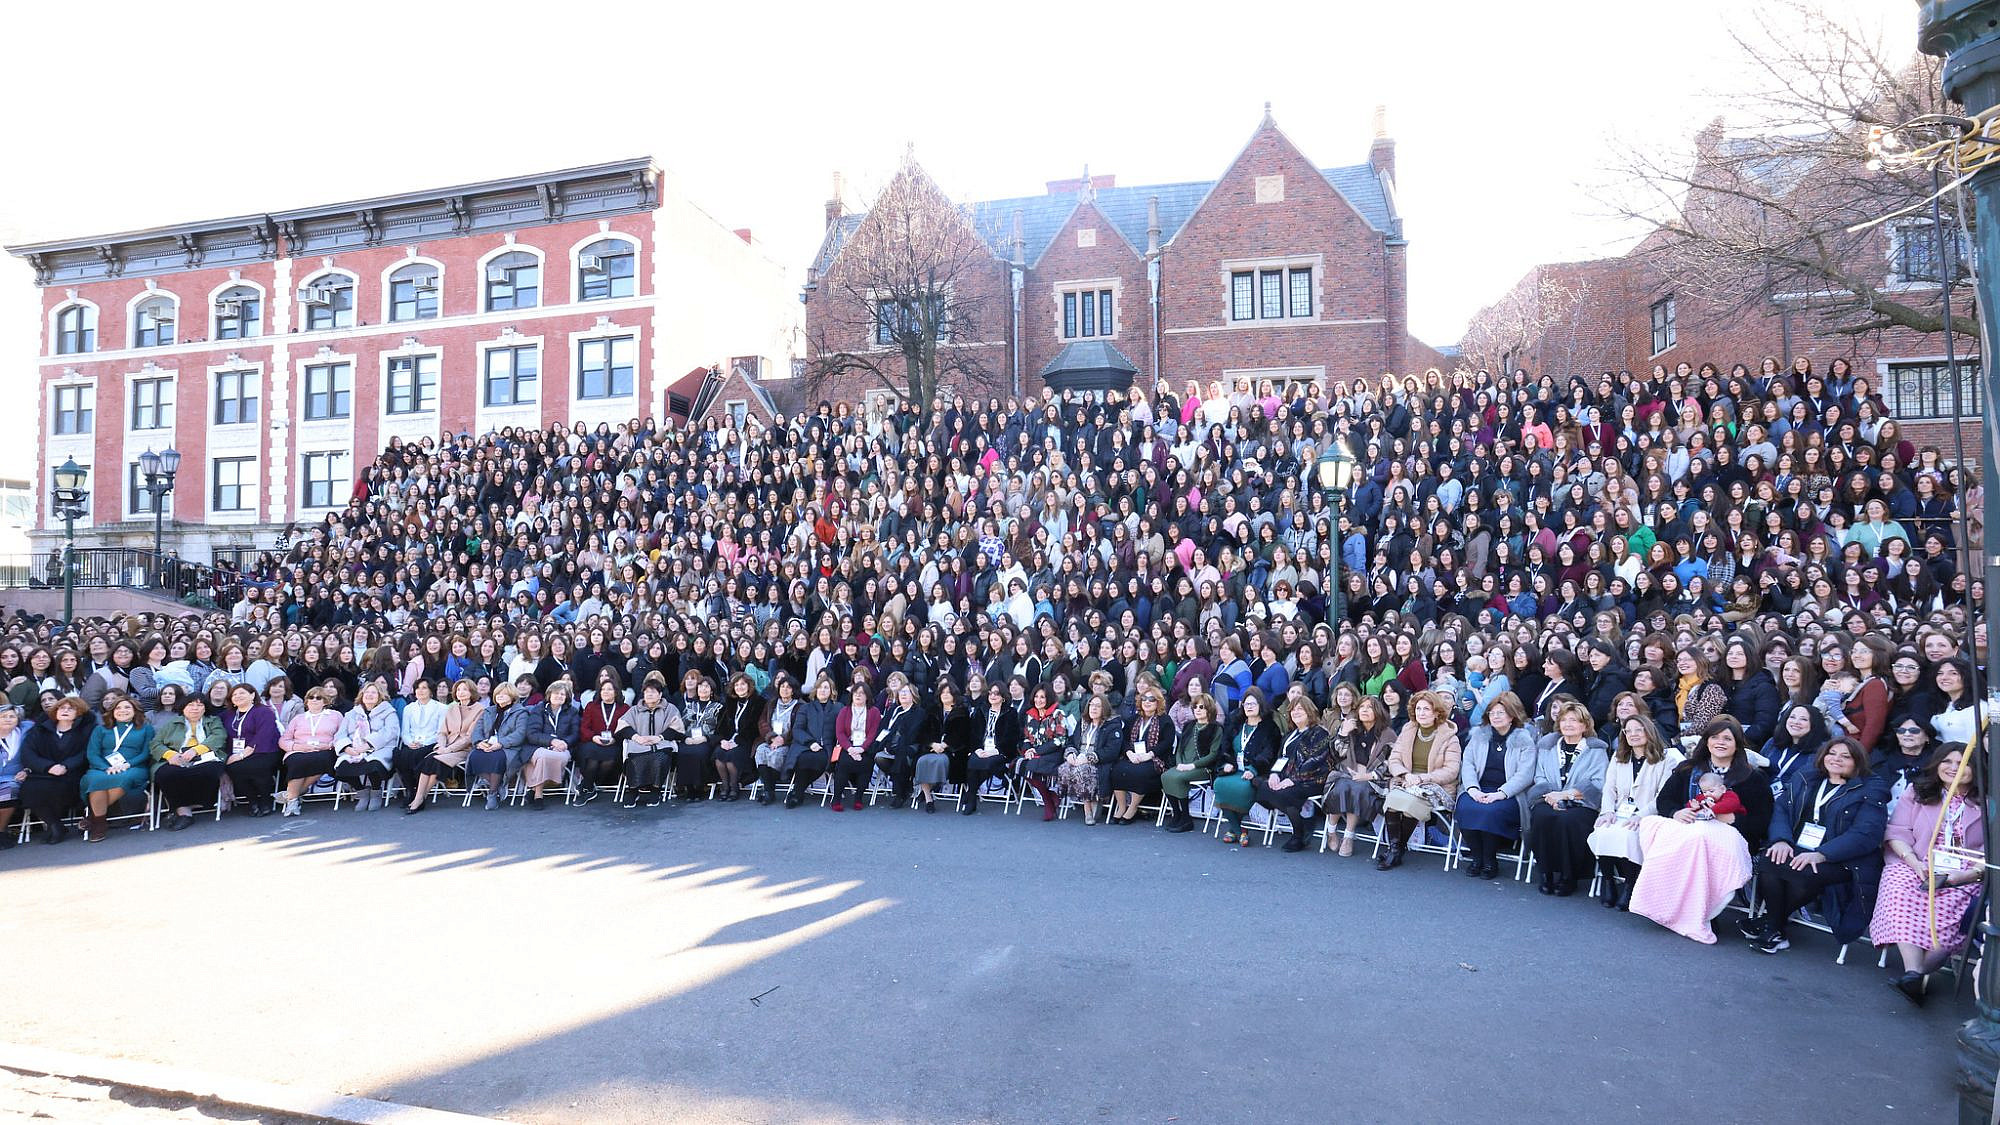 A group photo of Chabad-Lubavitch women emissaries for this year's Kinus HaShluchos. Credit: Chabad-Lubavitch.